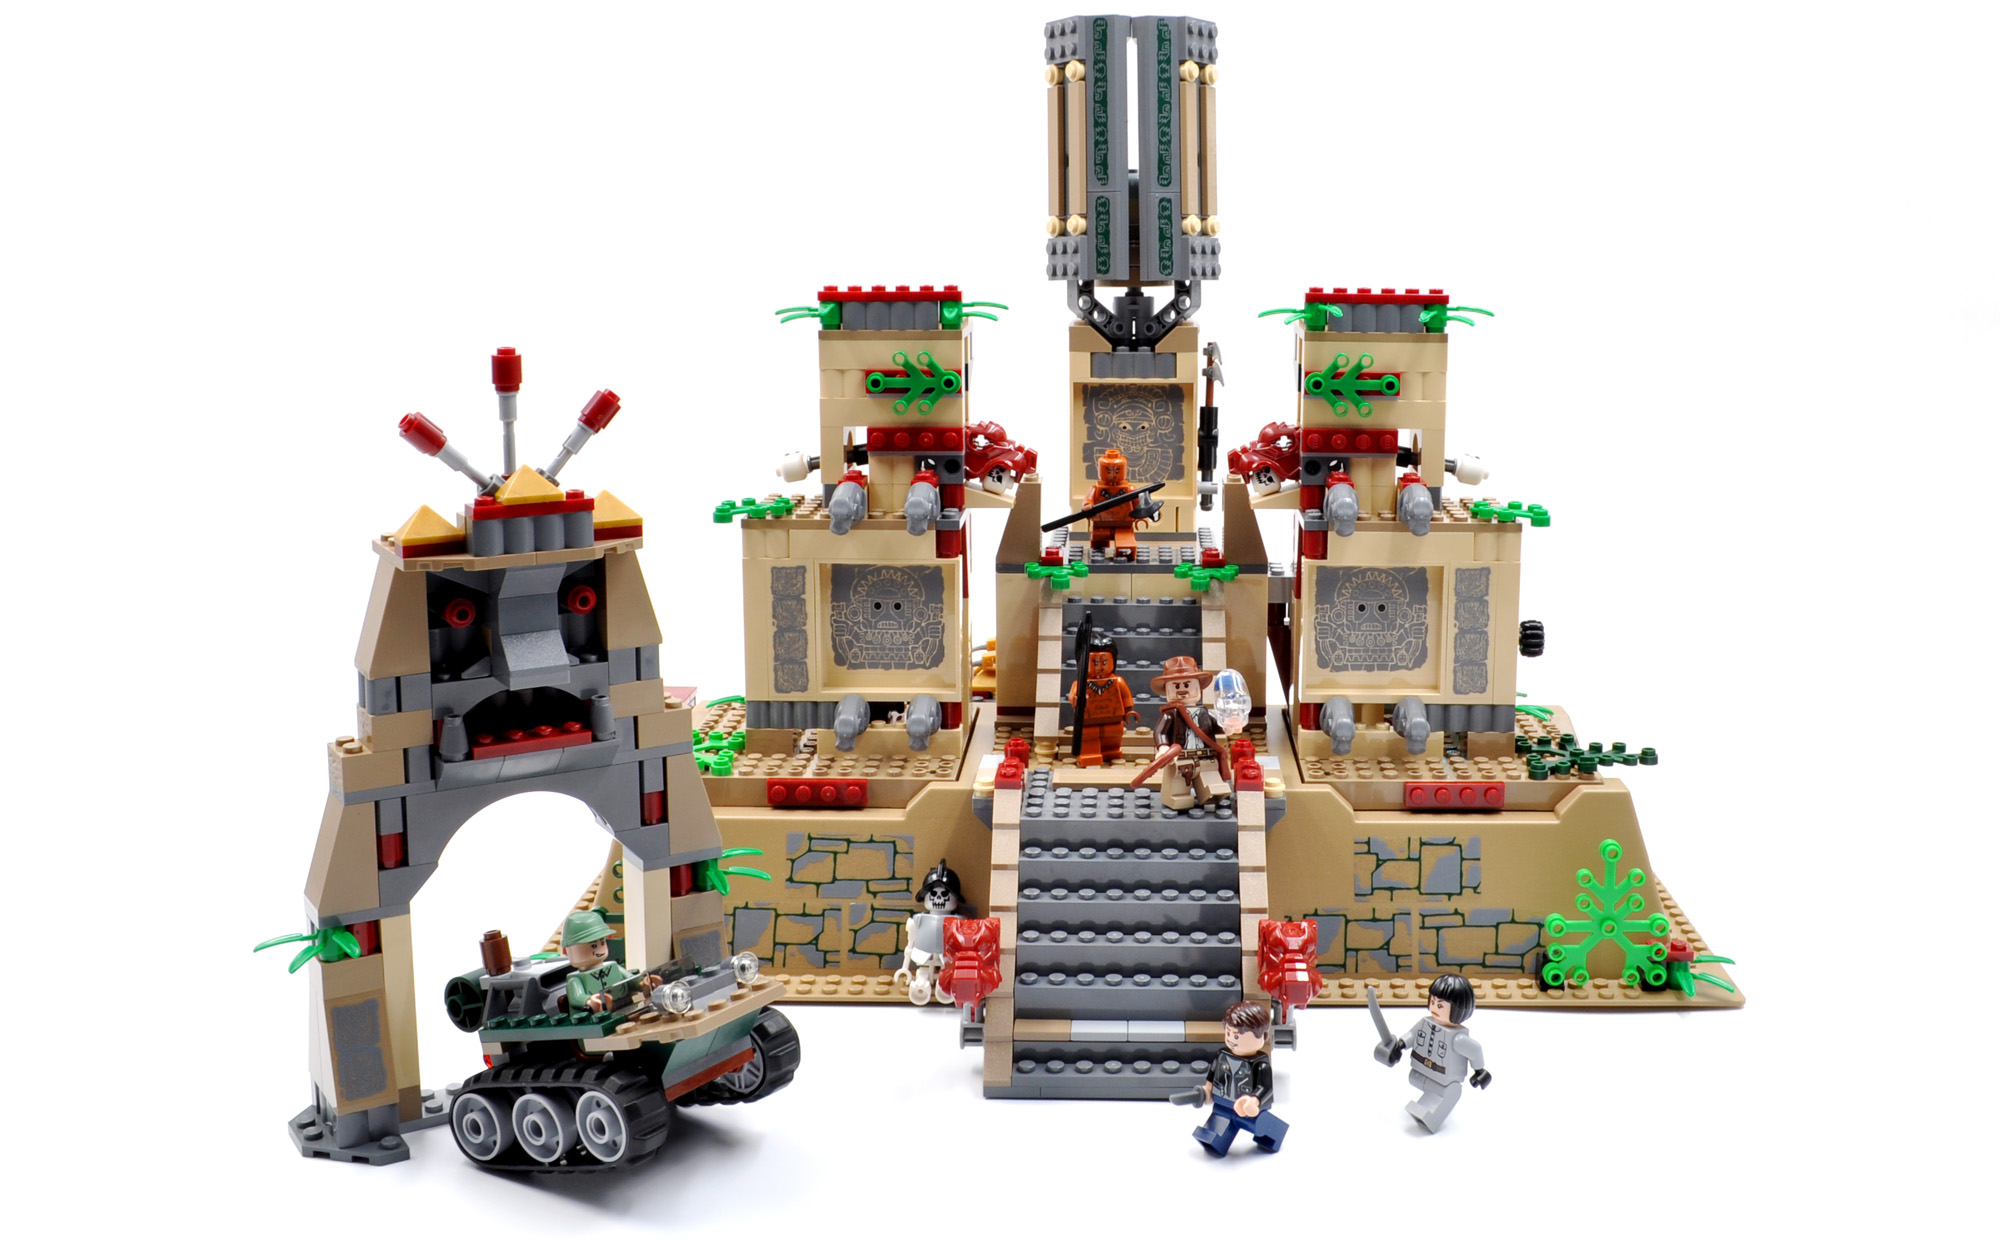 Temple of the Crystal Skull (7627)